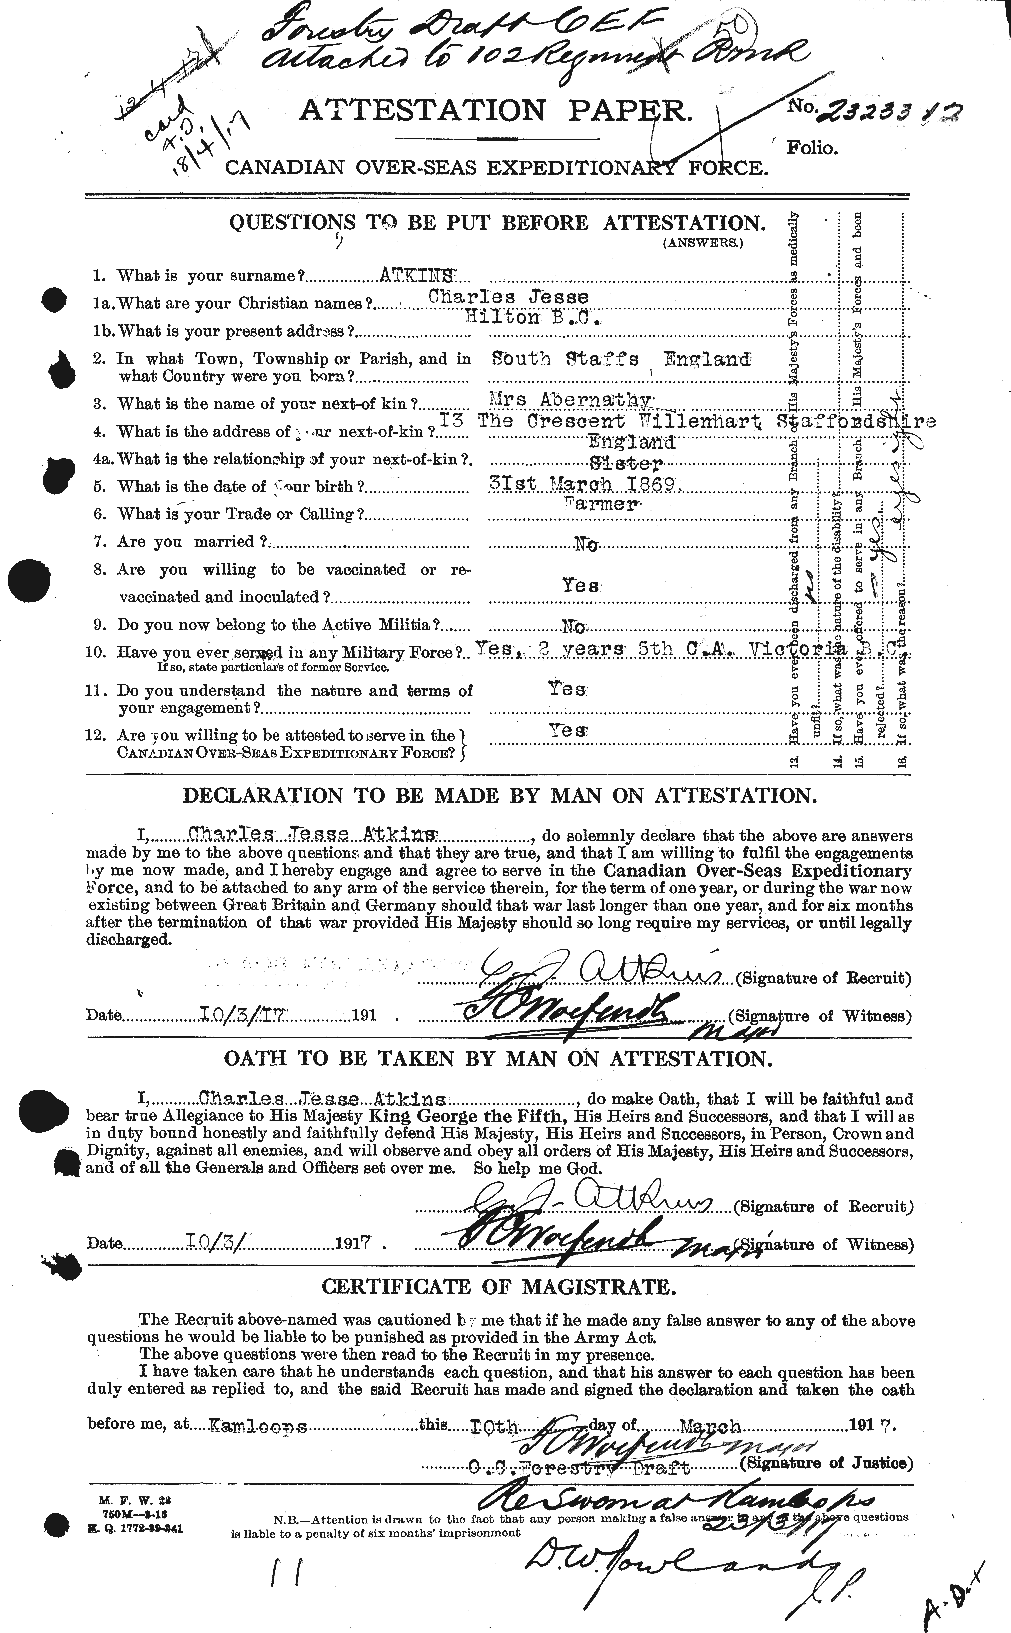 Personnel Records of the First World War - CEF 216884a